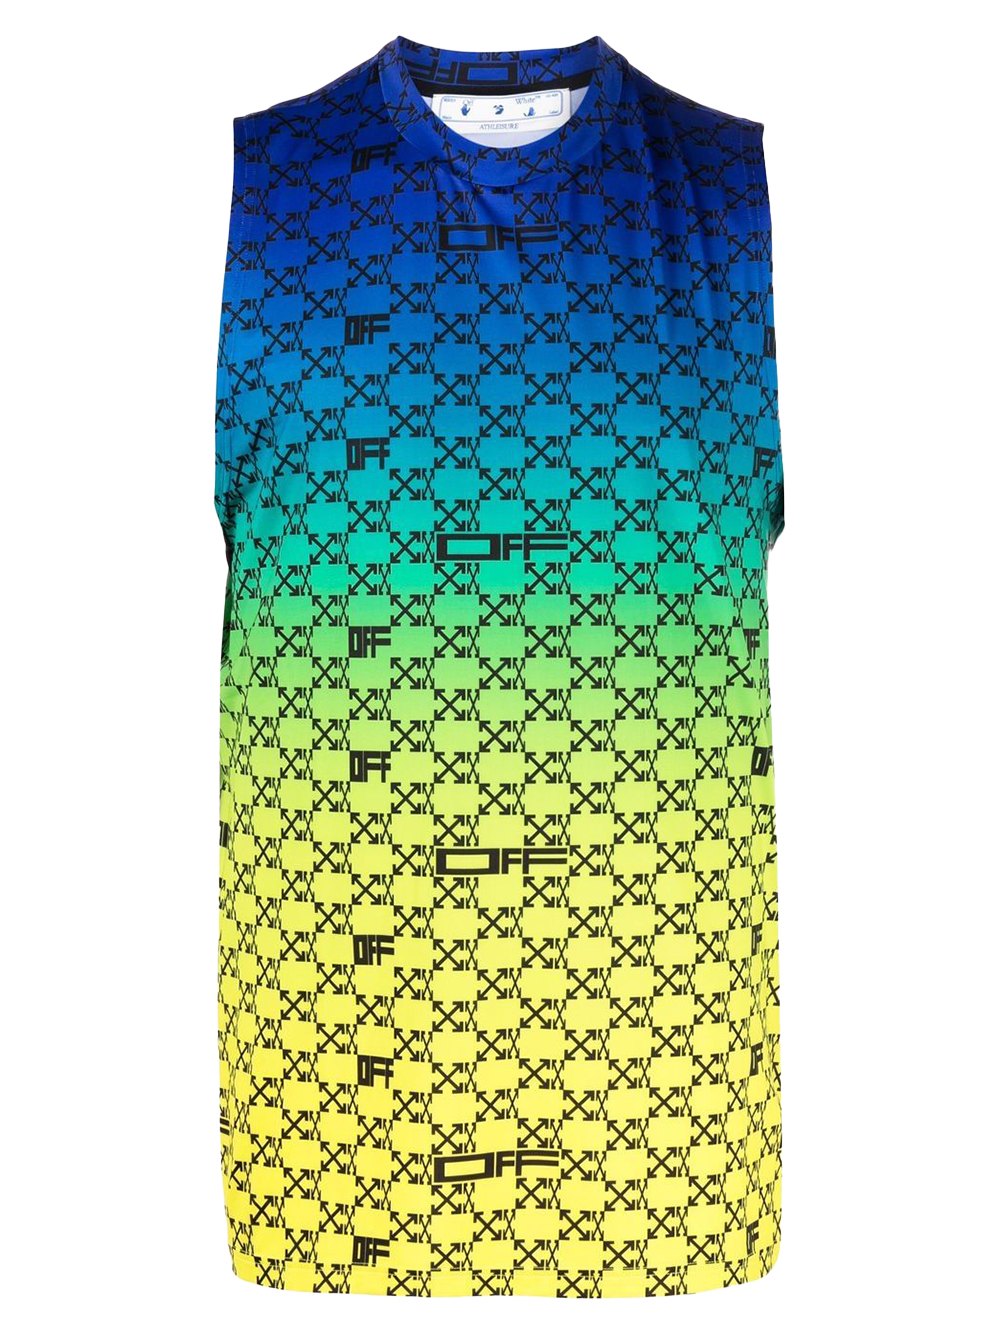 OFF-WHITE Iridescent All Over Arrows Monogram Shorts Blue/Yellow/Black